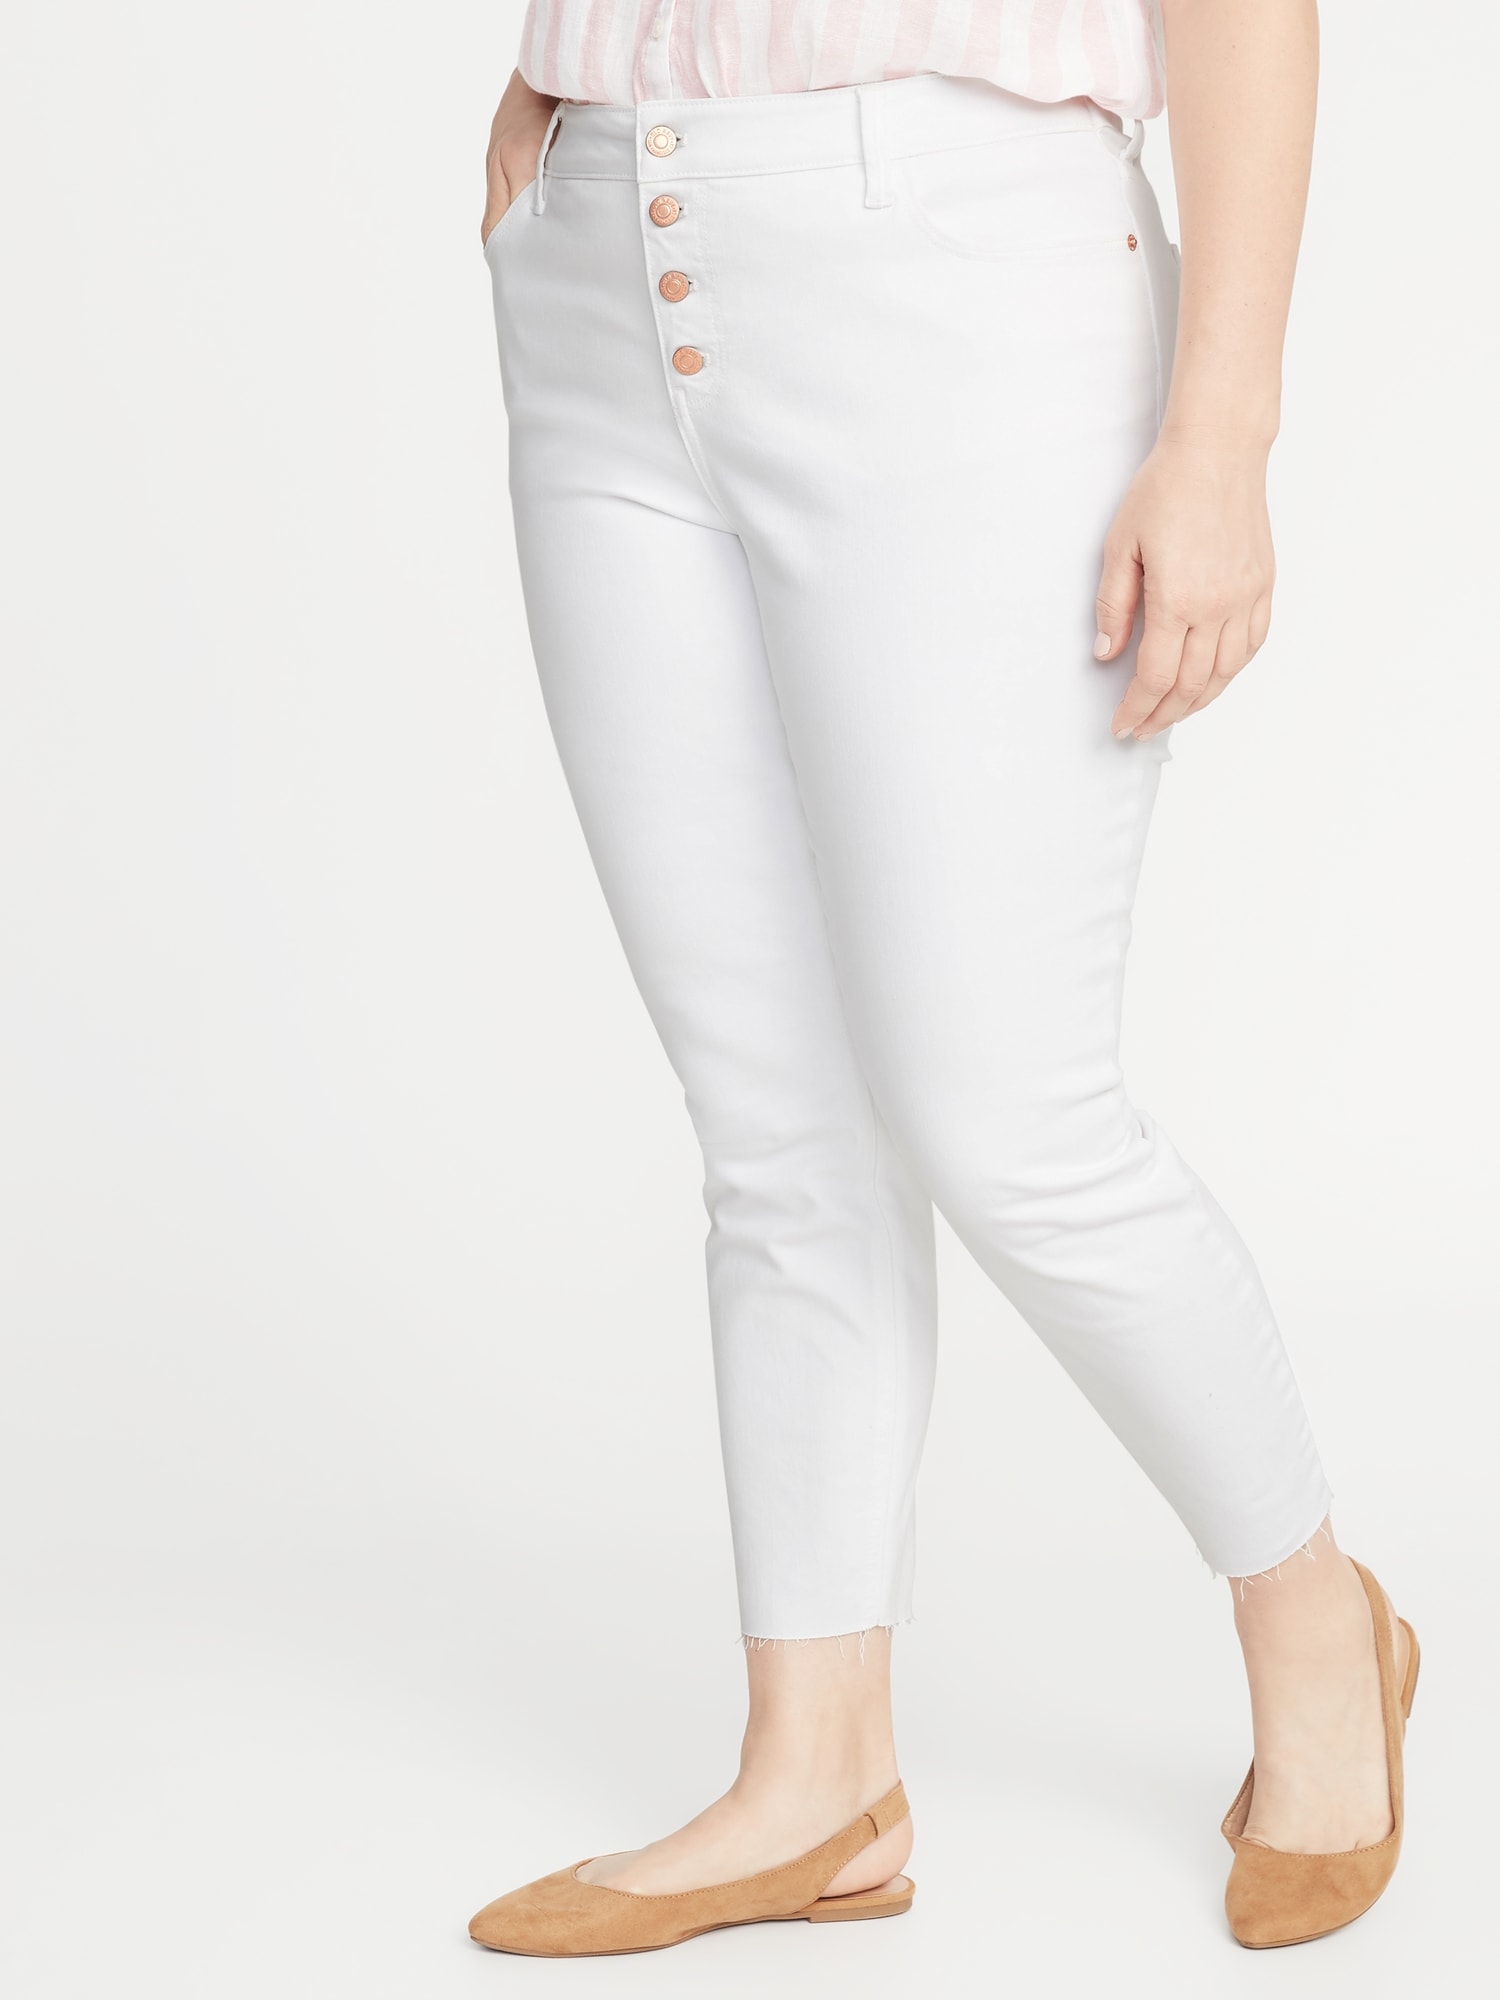 old navy plus size white jeans